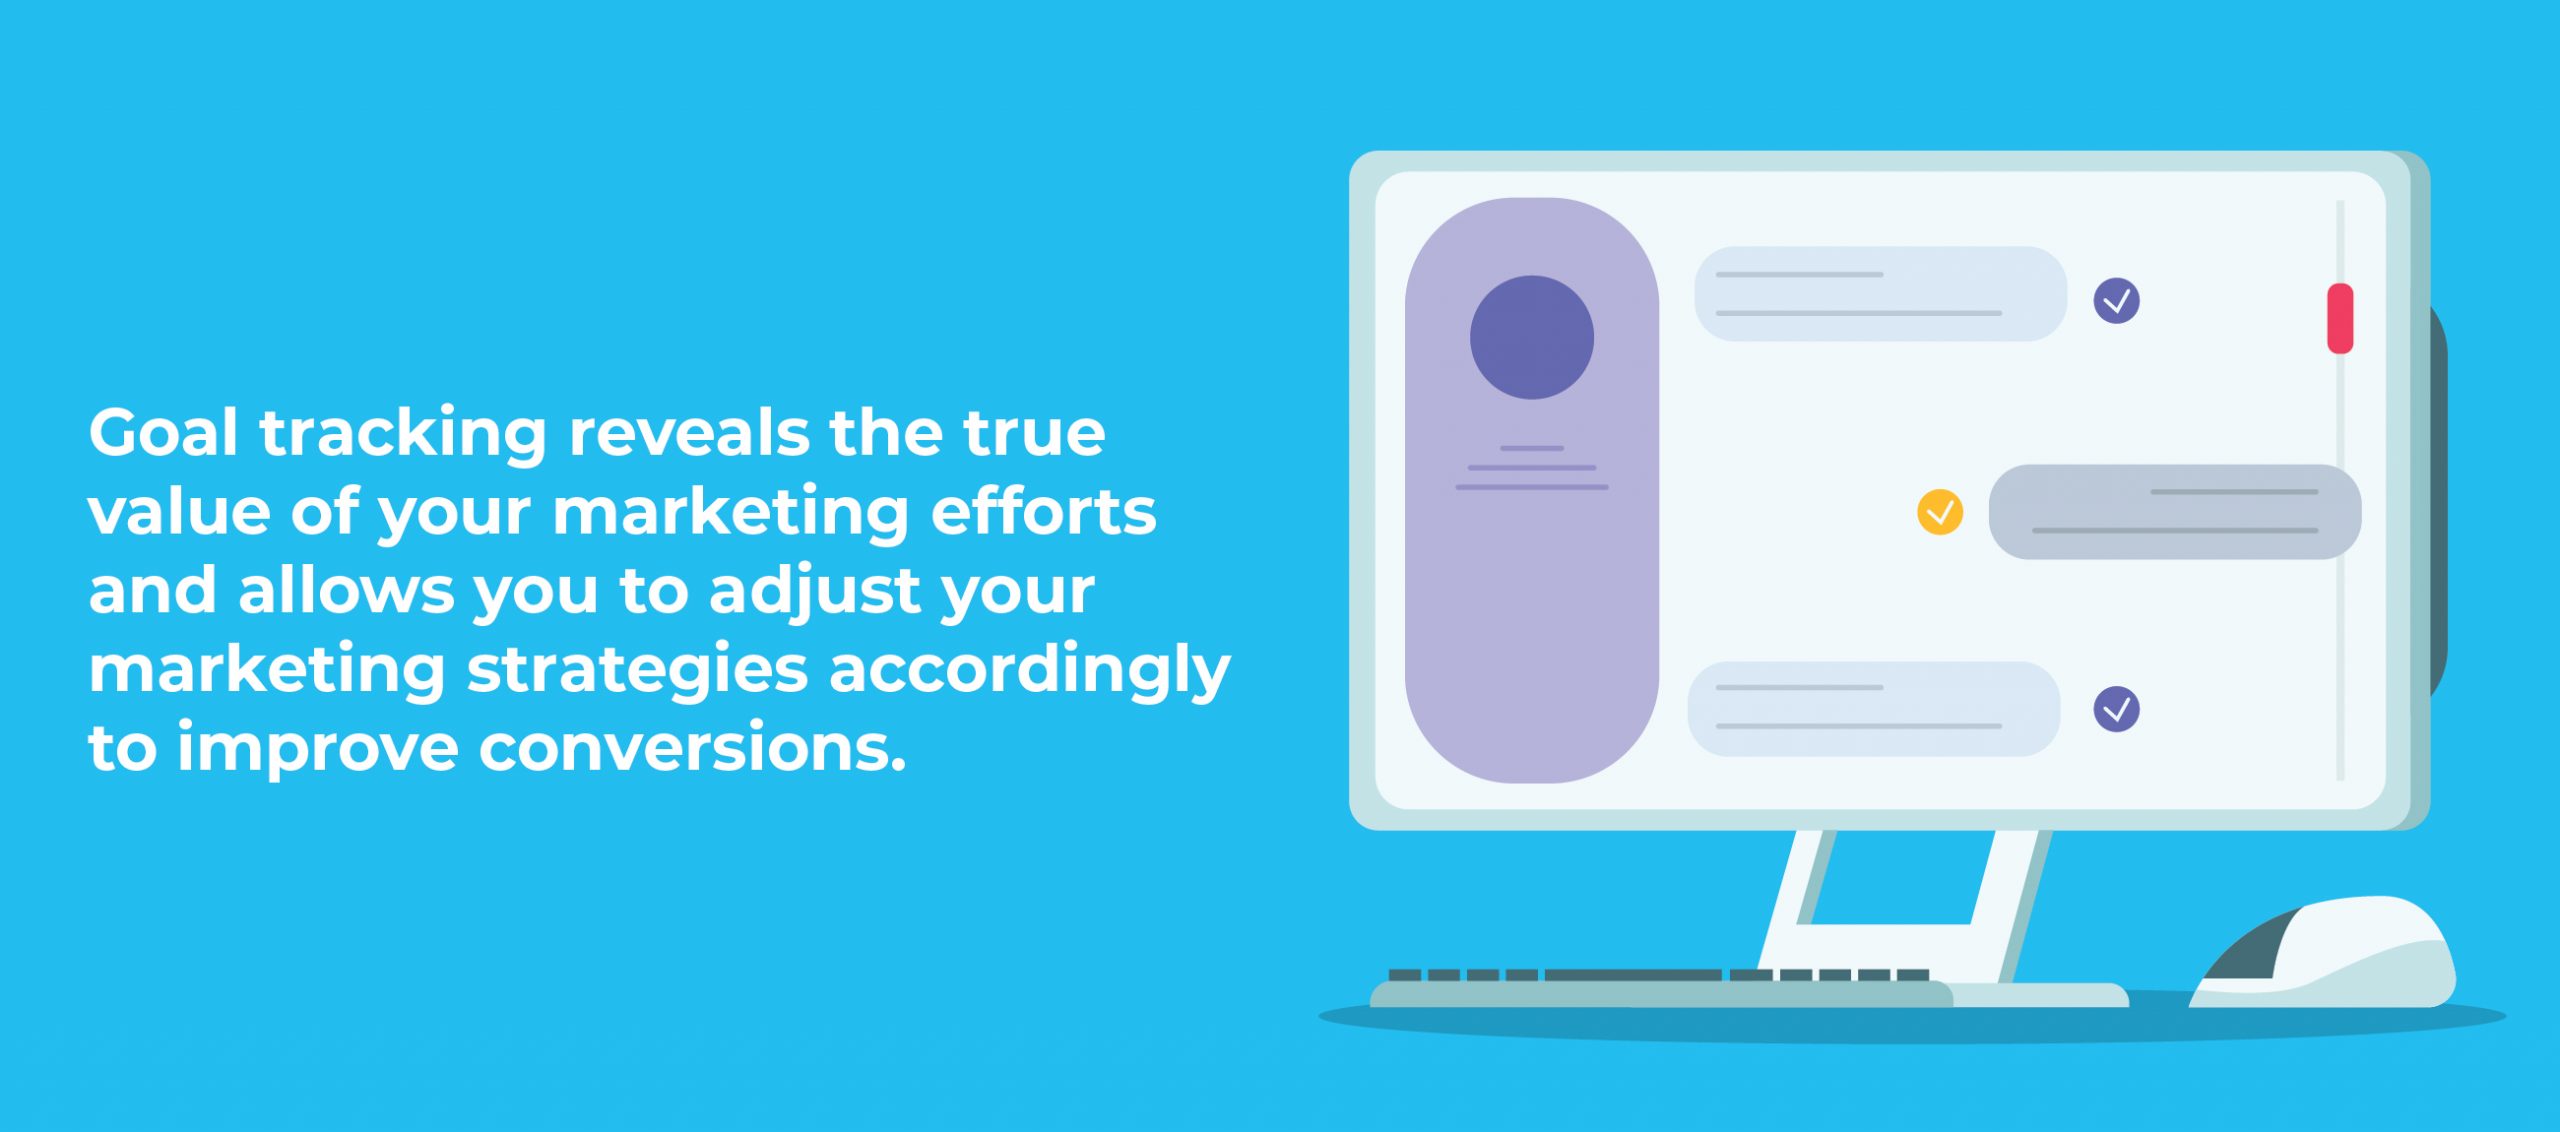 Goal tracking reveals the true value of your marketing efforts and allows you to adjust your marketing strategies accordingly to improve conversions.